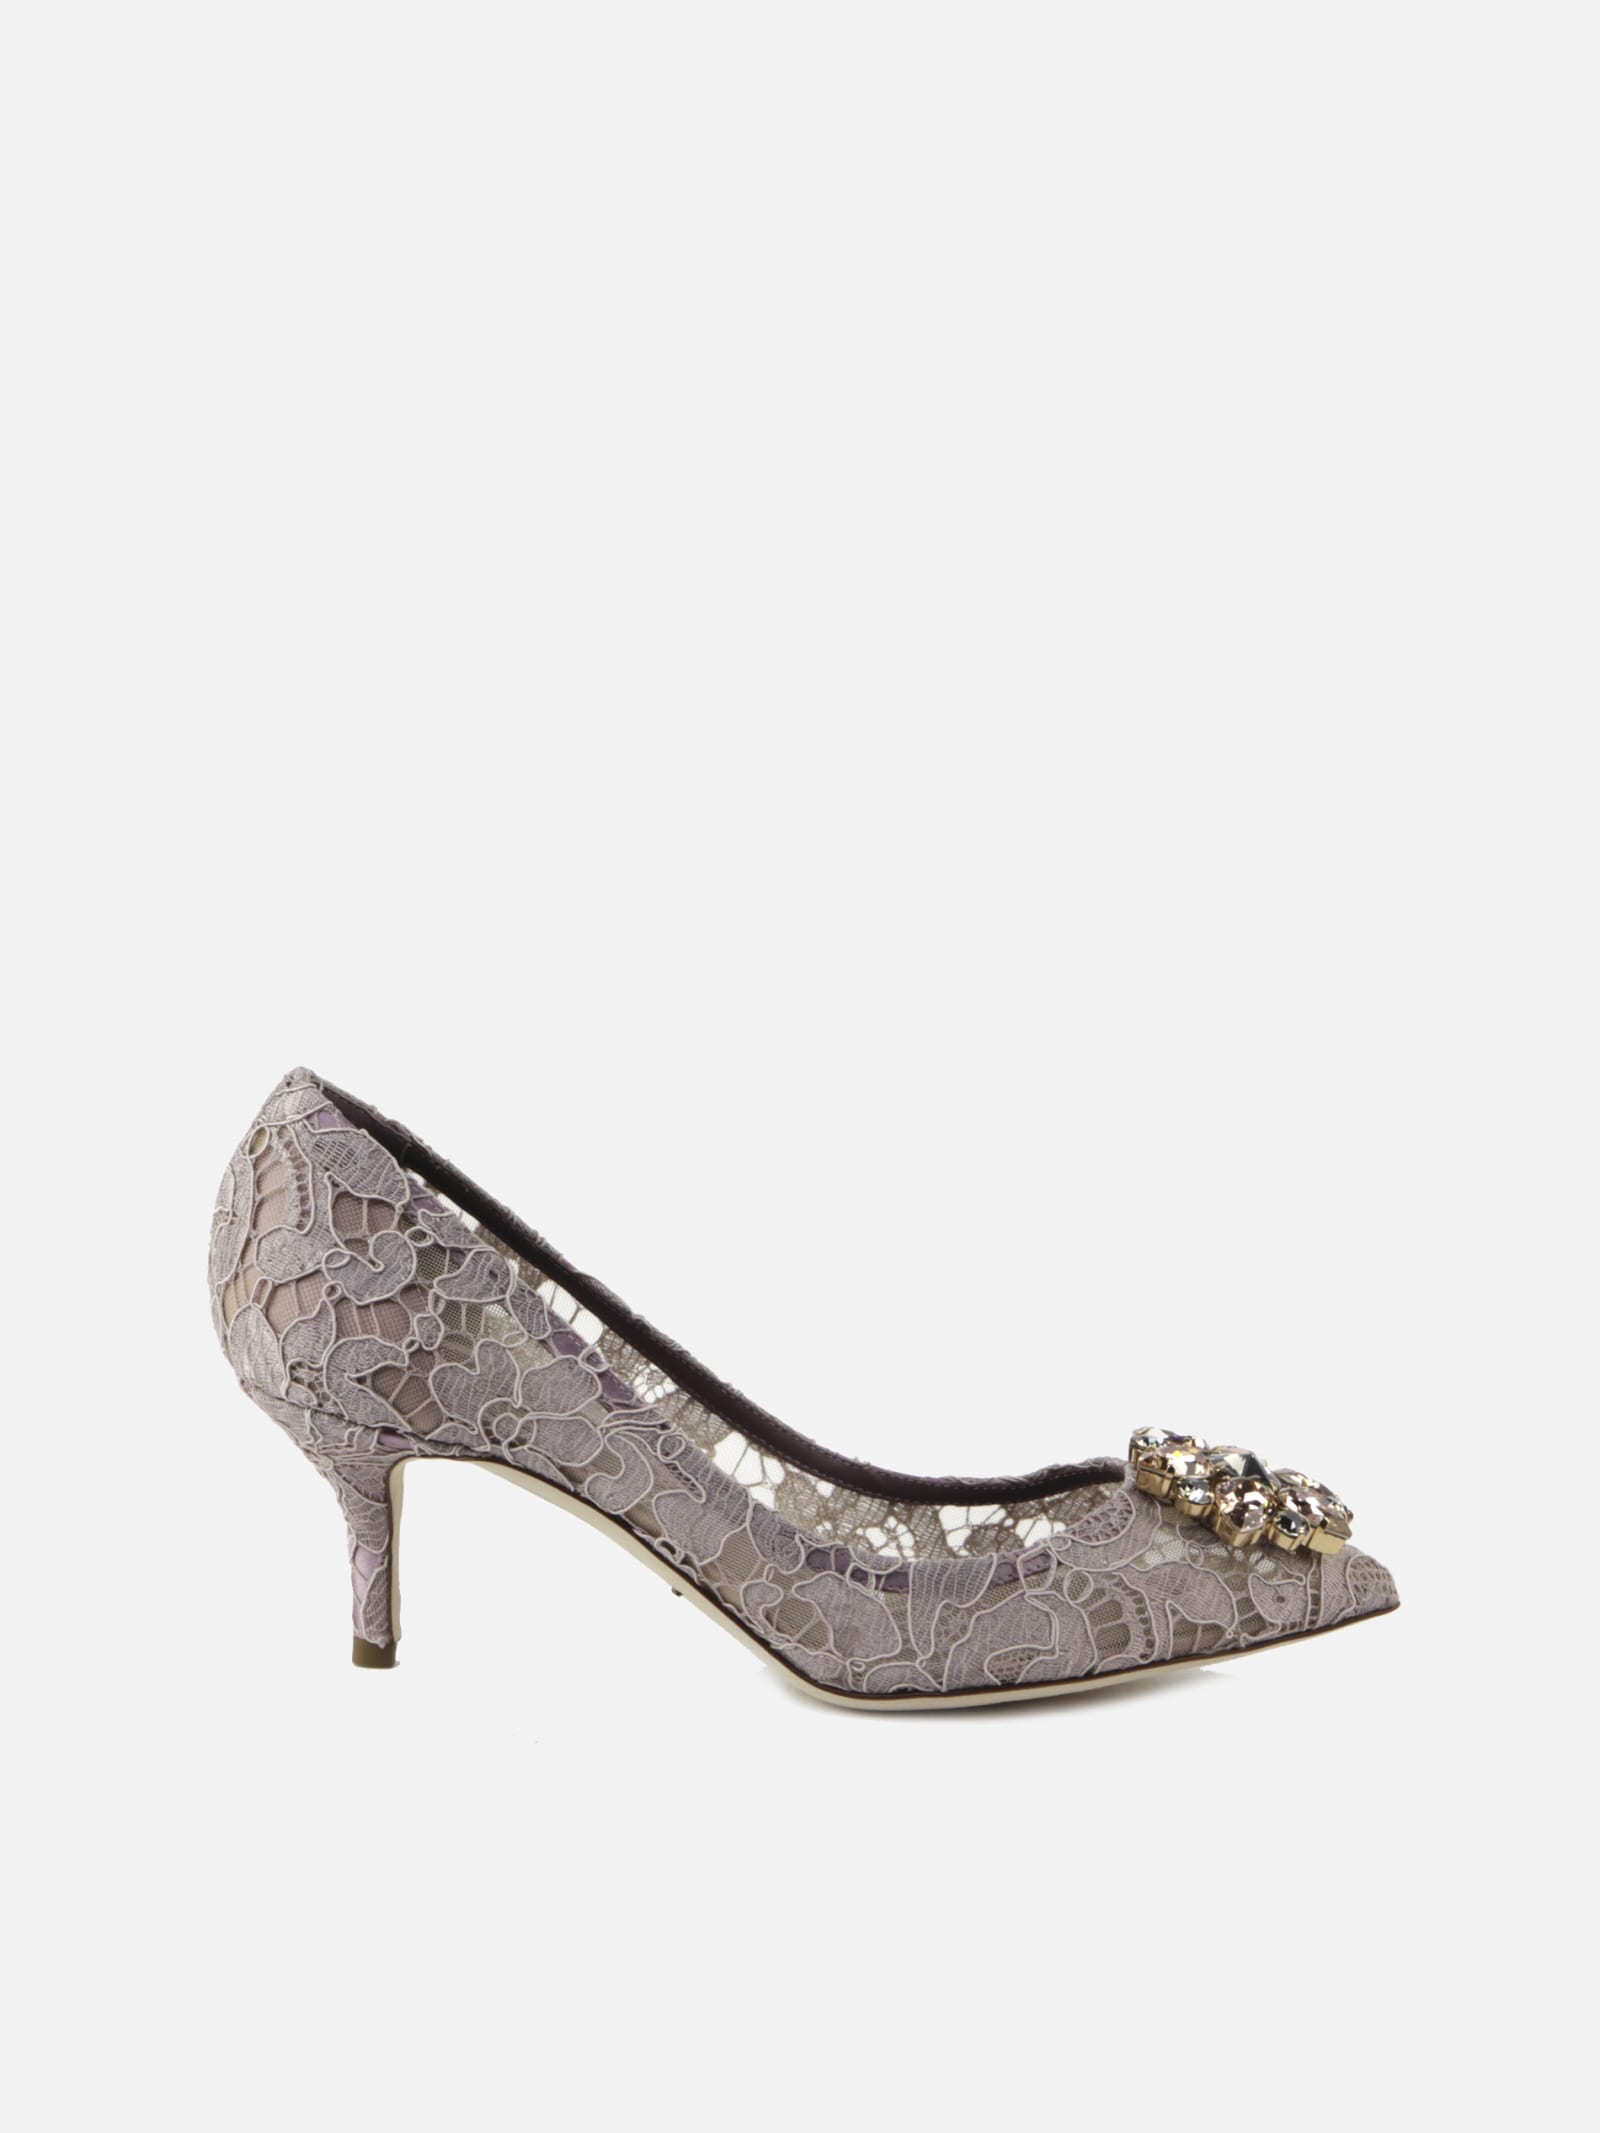 Buy Dolce & Gabbana Bellucci D?ollet?In Taormina Lace online, shop Dolce & Gabbana shoes with free shipping